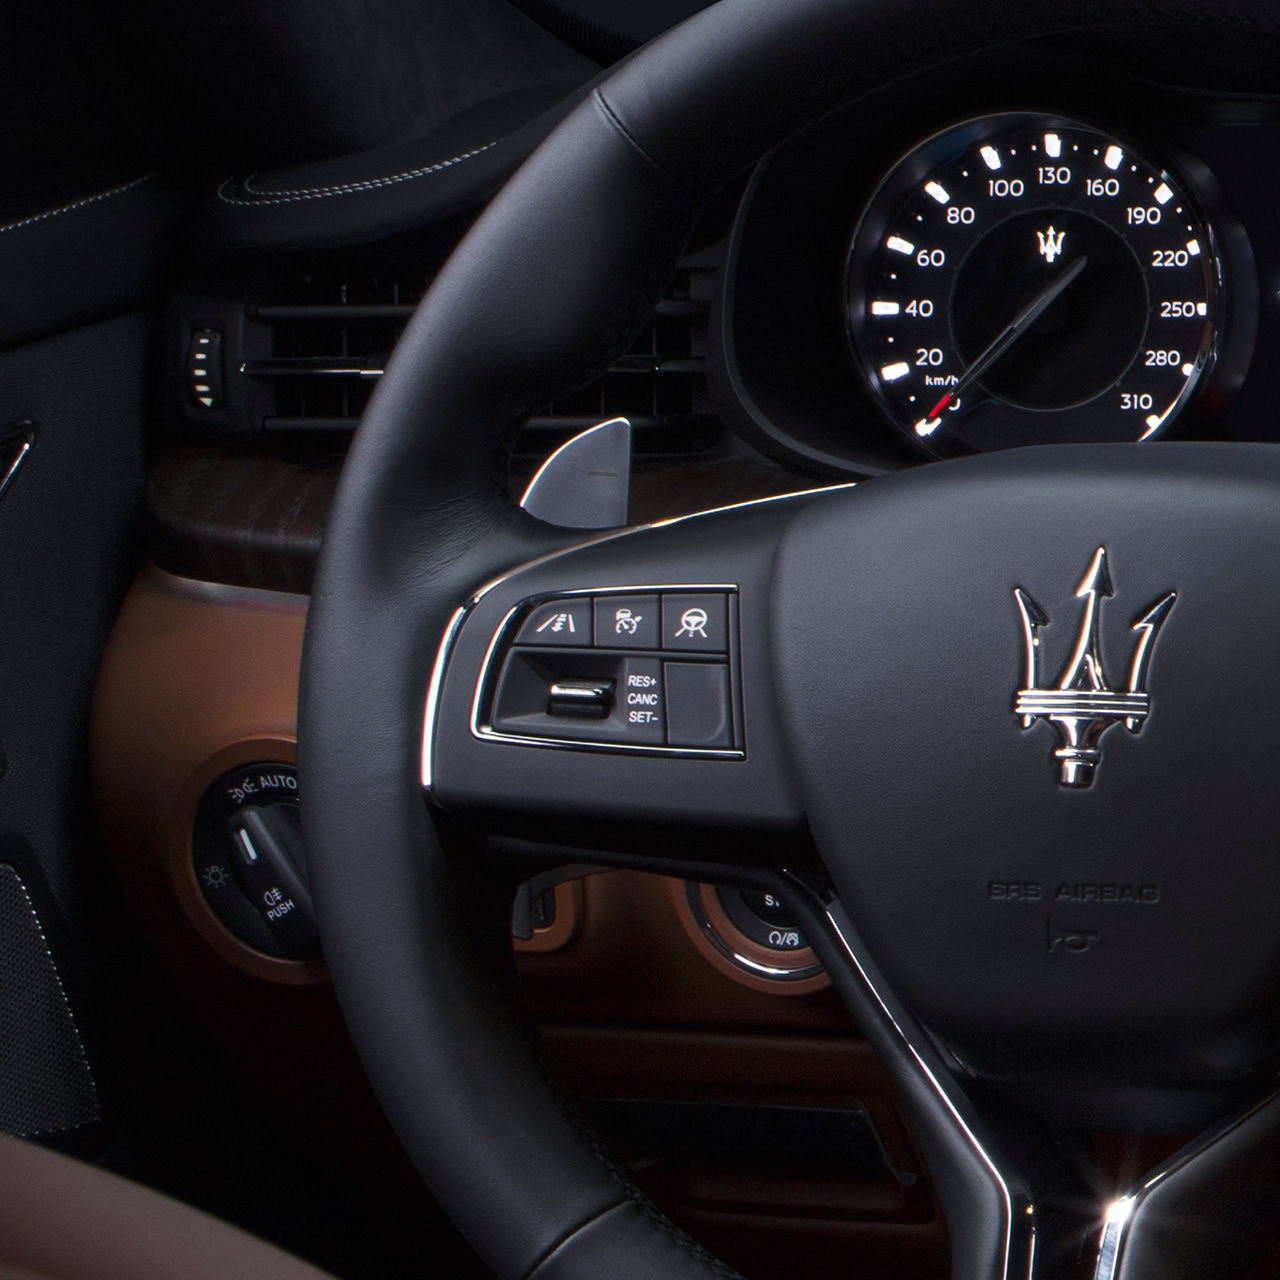 Driver Assist System on Steering Wheel of Quattroporte